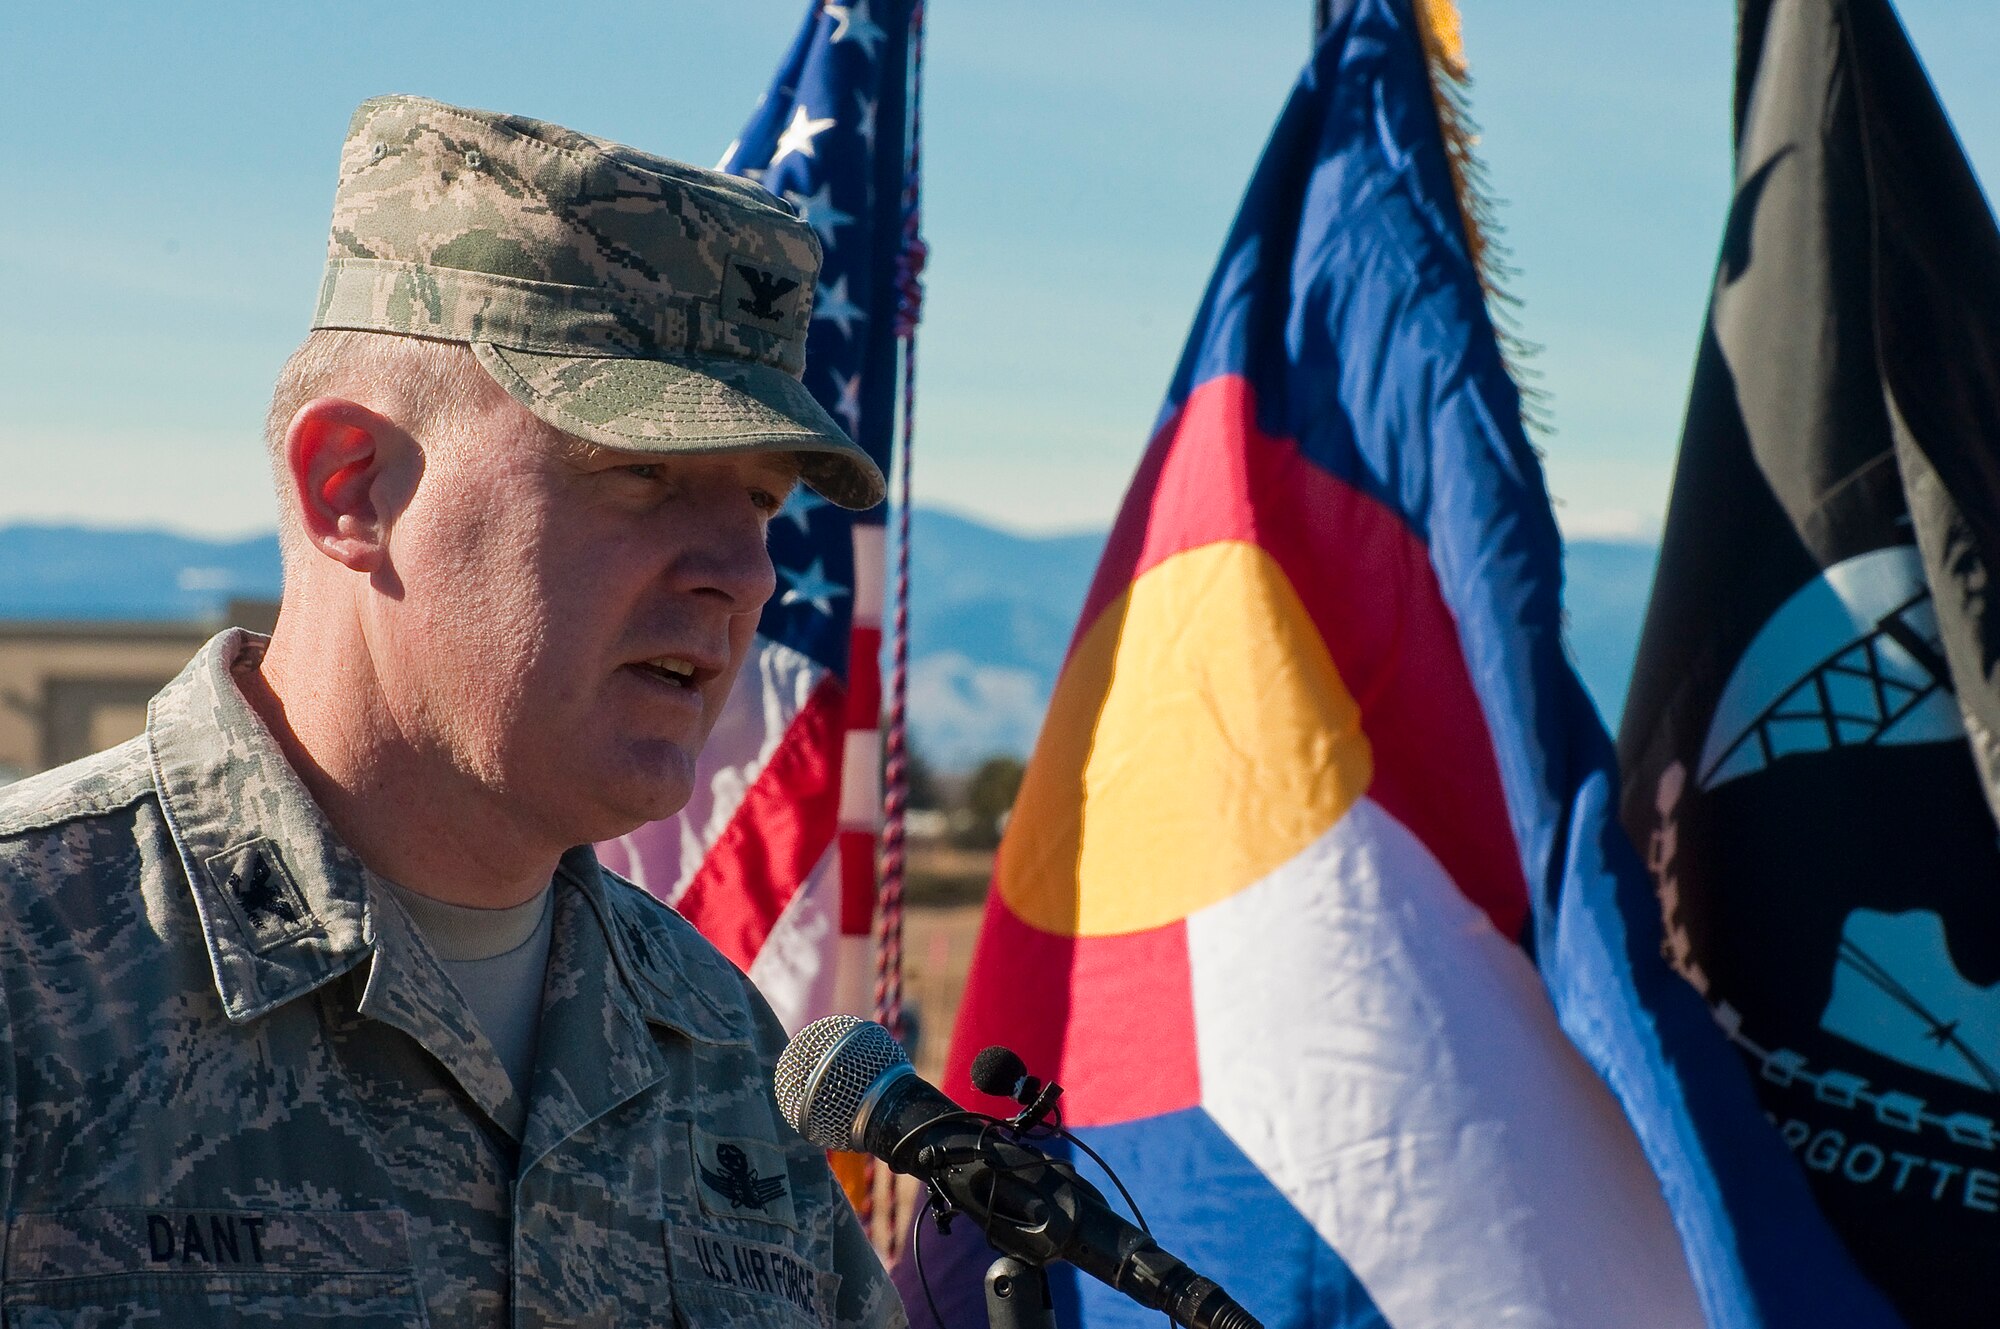 Col. Daniel Dant, 460th Space Wing commander, addresses the audience just before ground is broken for the Colorado Freedom Memorial Feb. 2, 2013, in Aurora, Colo. The memorial is a 12-year effort led by Rick Crandall and members for the CFM Foundation. The memorial will list the names of all Colorado service members who died during combat operations on foreign soil since Colorado became a state. This is the first memorial of its kind, which names members from all service branches and all wars. (Colorado Air National Guard photo by Capt. Darin Overstreet/Released)